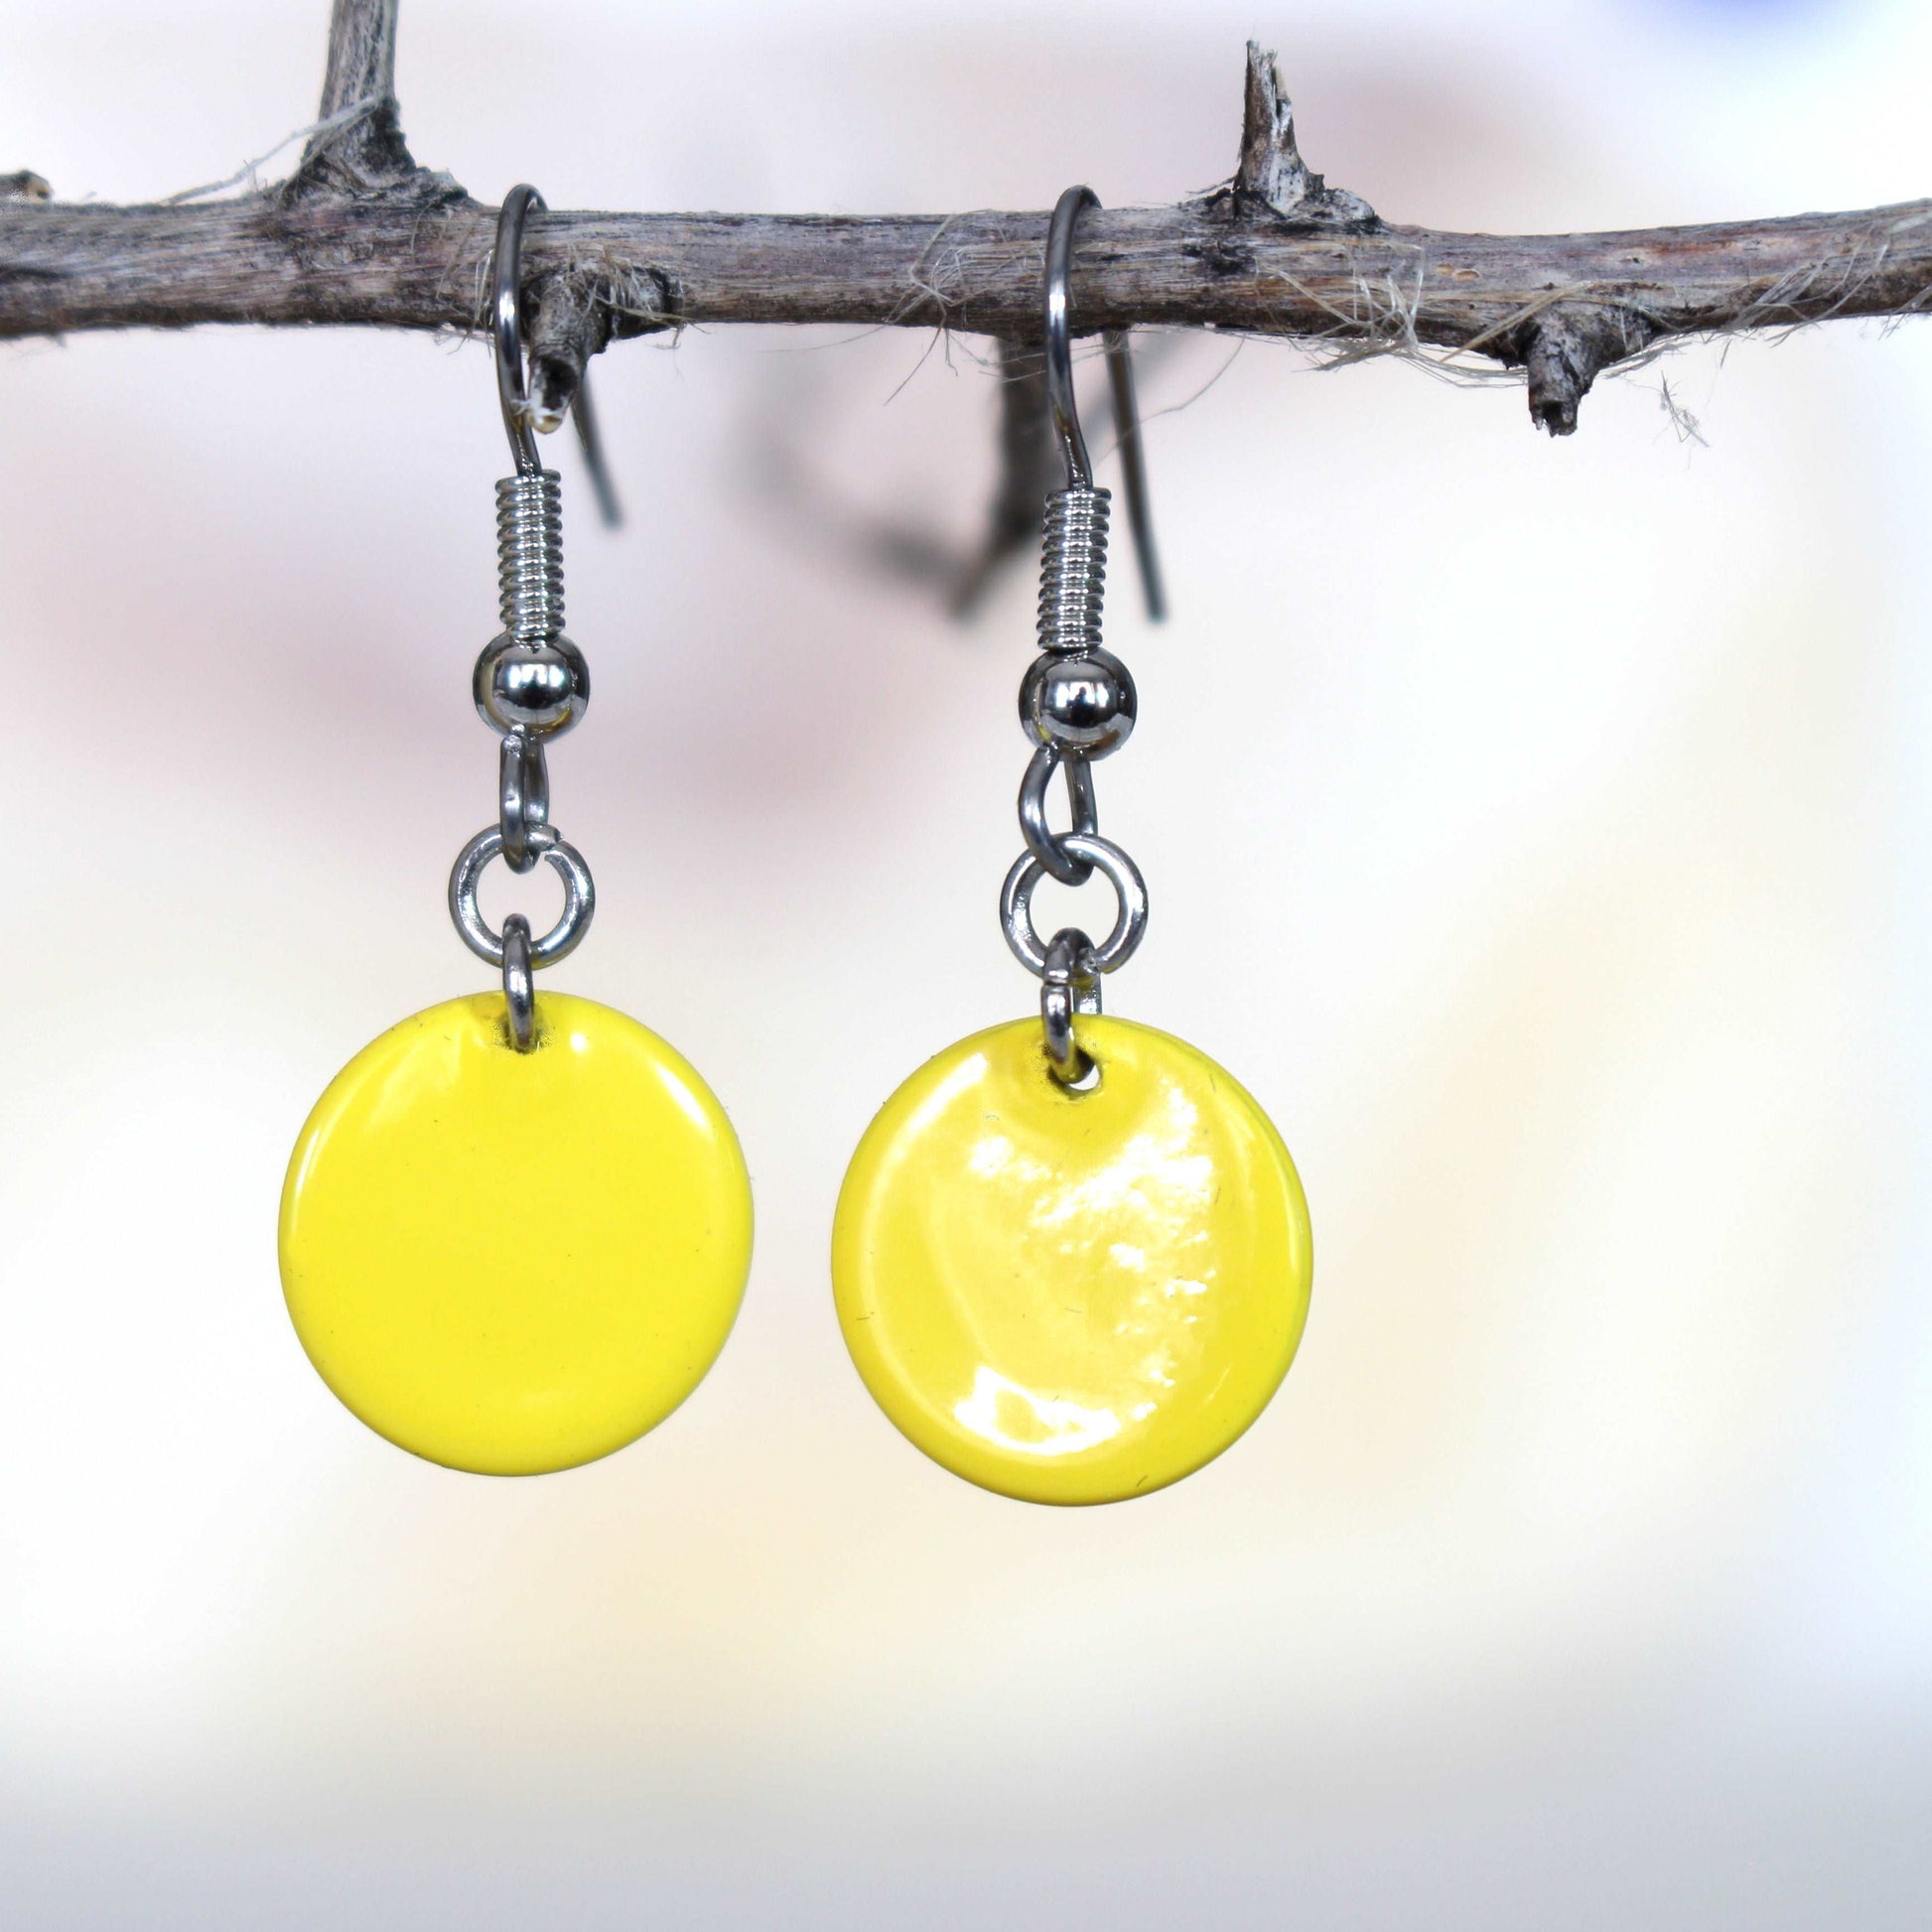 Colorful Disc Earrings in a choice of colors